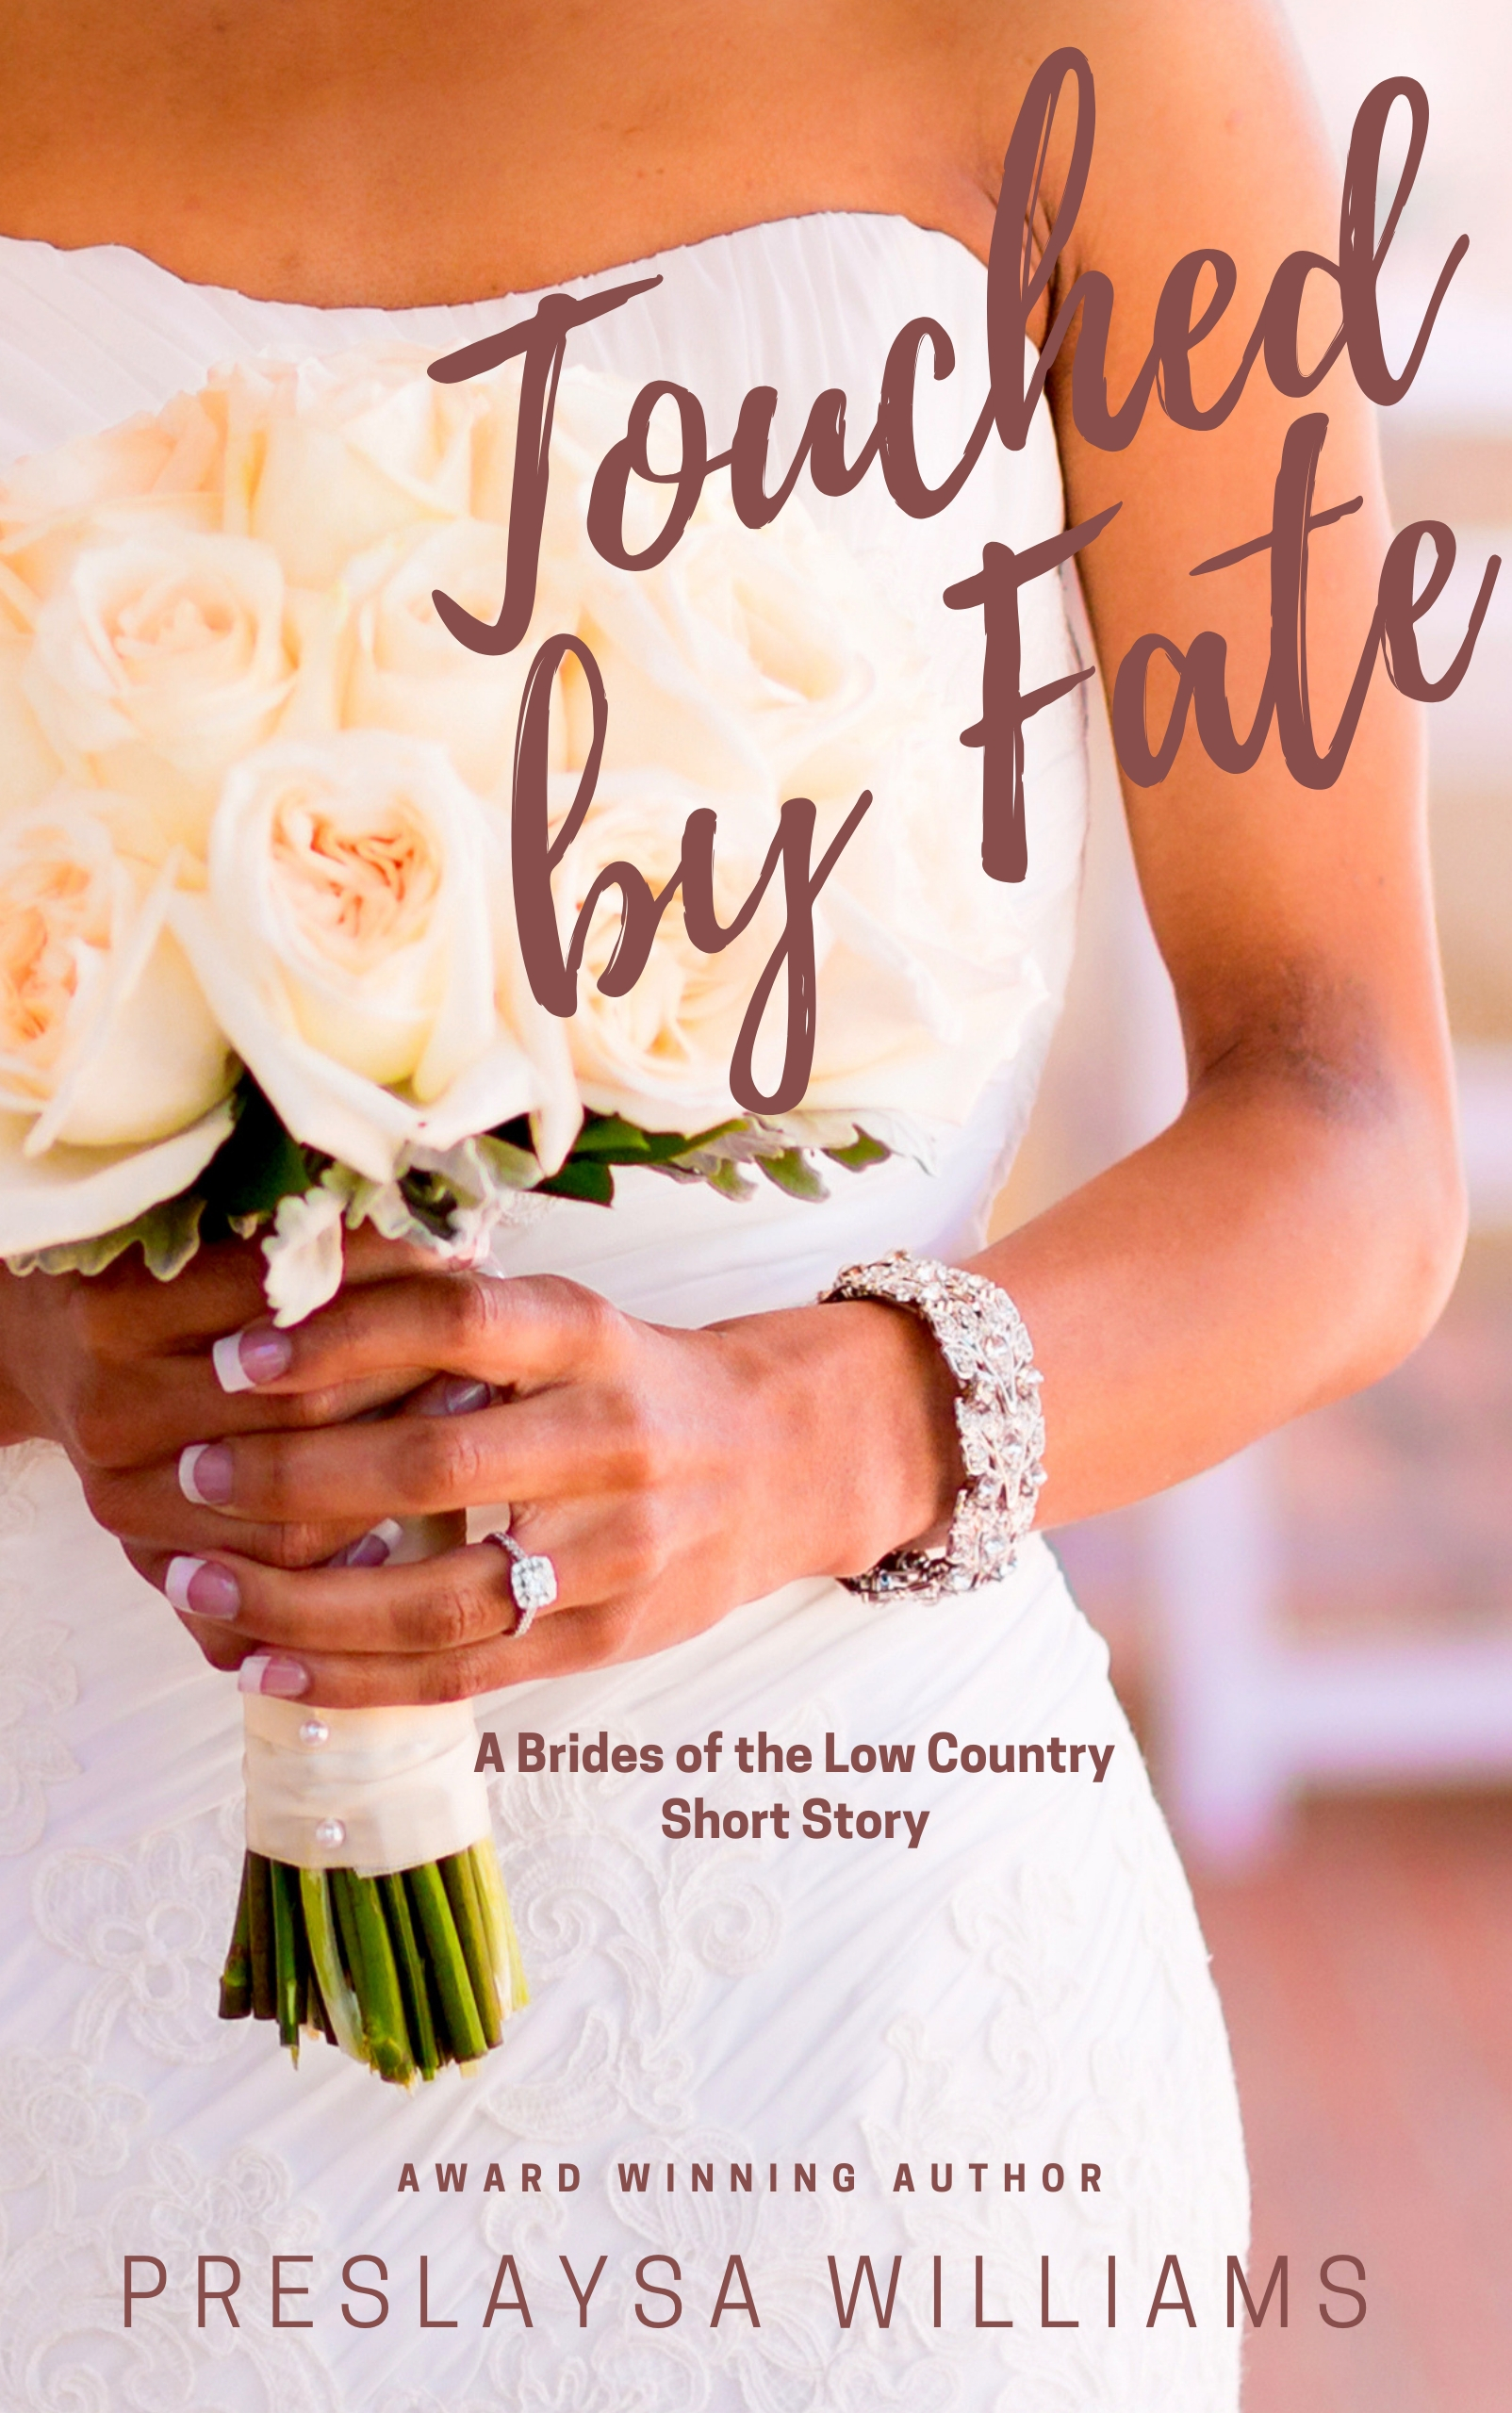 Touched by Fate by Preslaysa Williams - a picture of a bride holding a bouquet of flowers